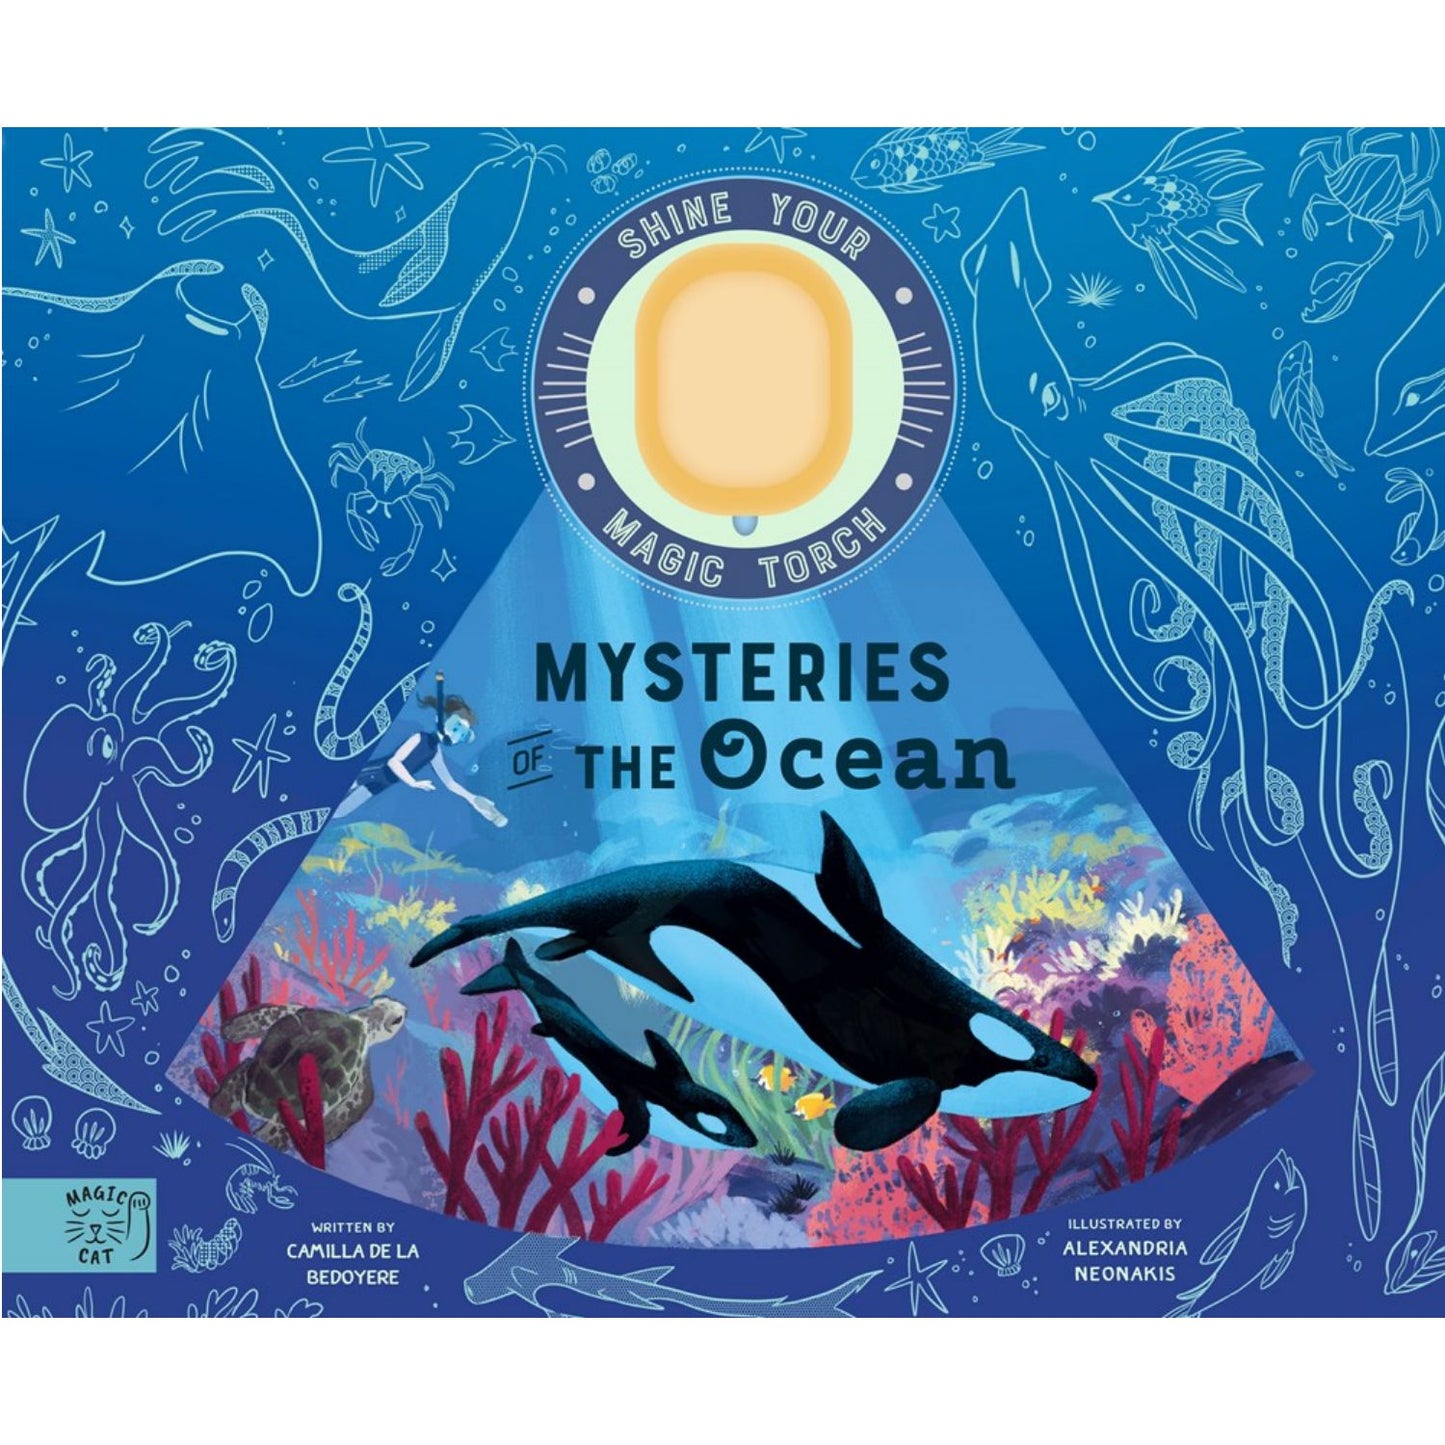 Mysteries of the Ocean: Includes Magic Torch Which Illuminates More Than 50 Marine Animals | Children's Book on Sea Life